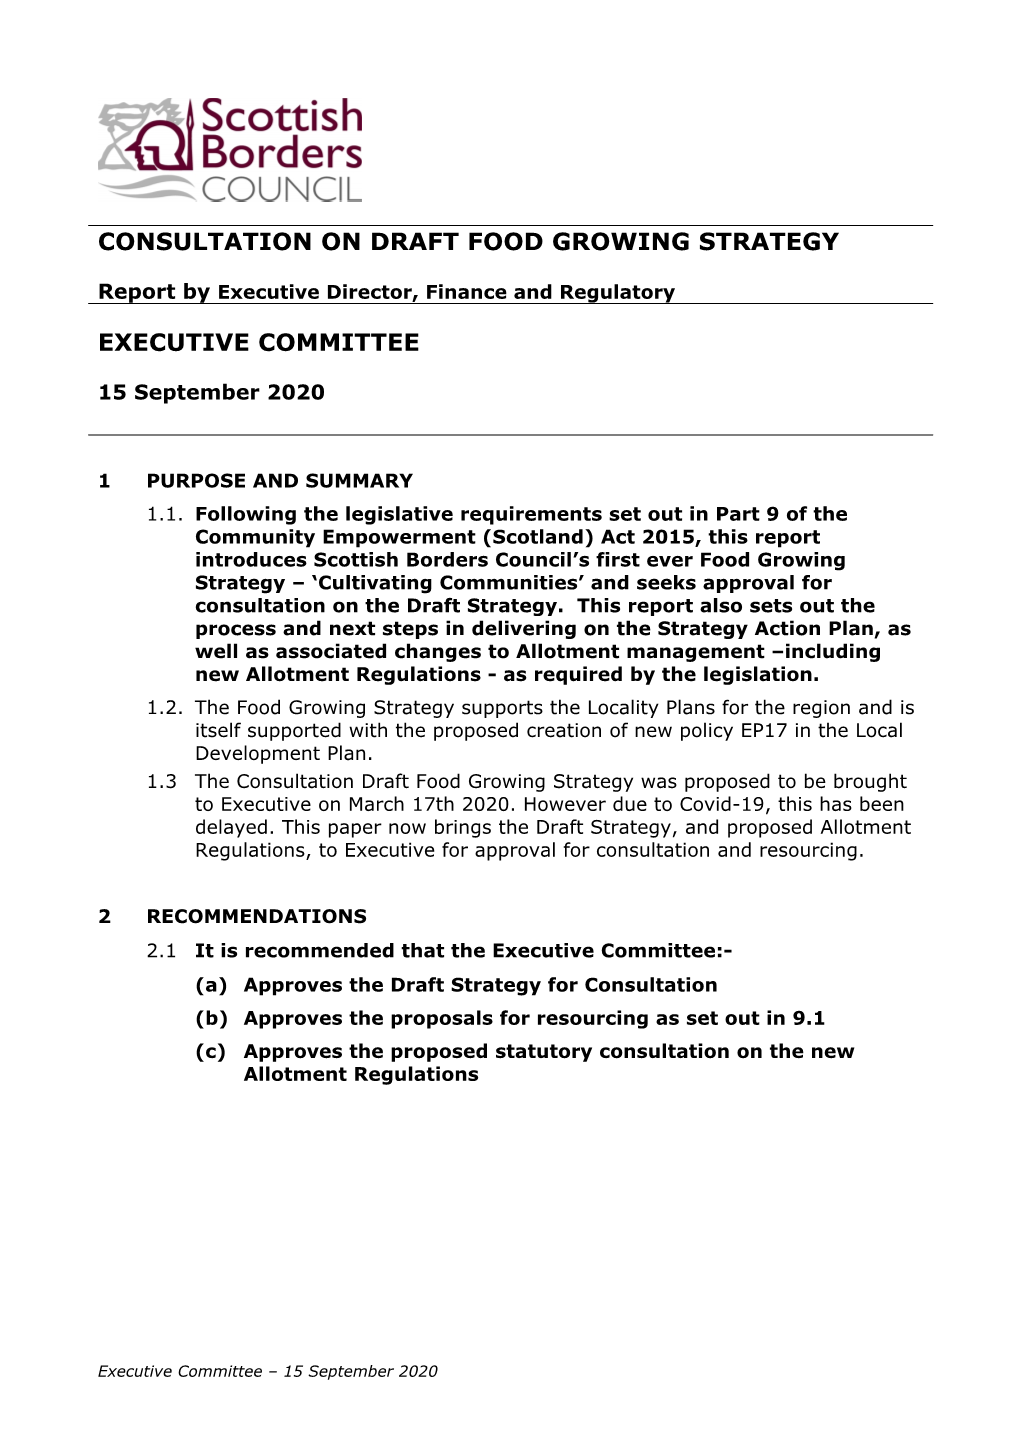 Consultation on Draft Food Growing Strategy